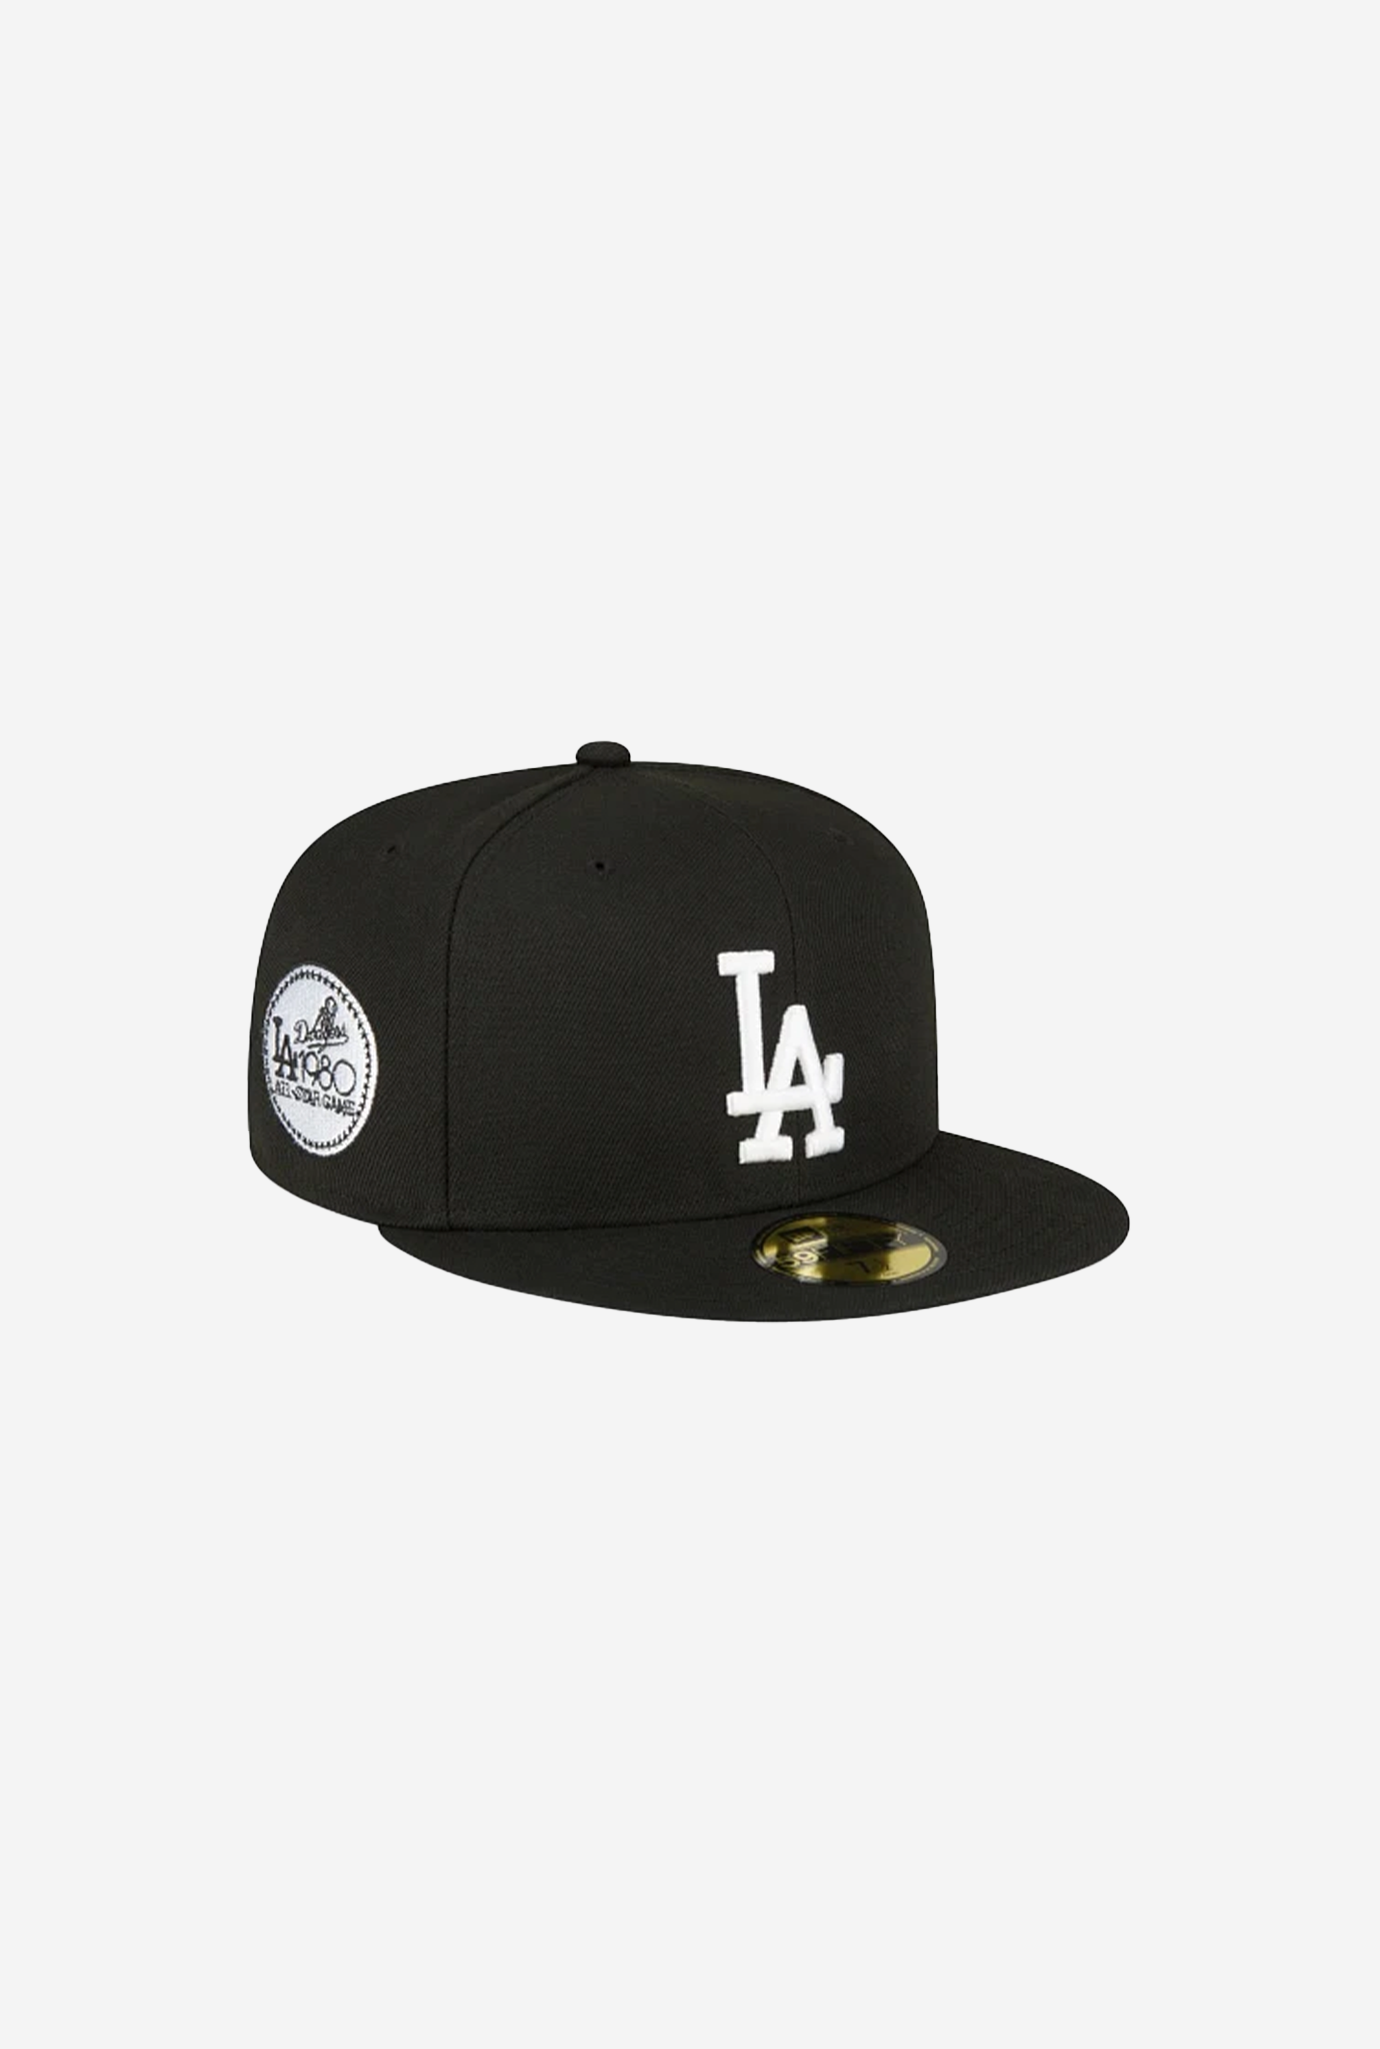 Los Angeles Dodger 1980 All Star Game 59FIFTY